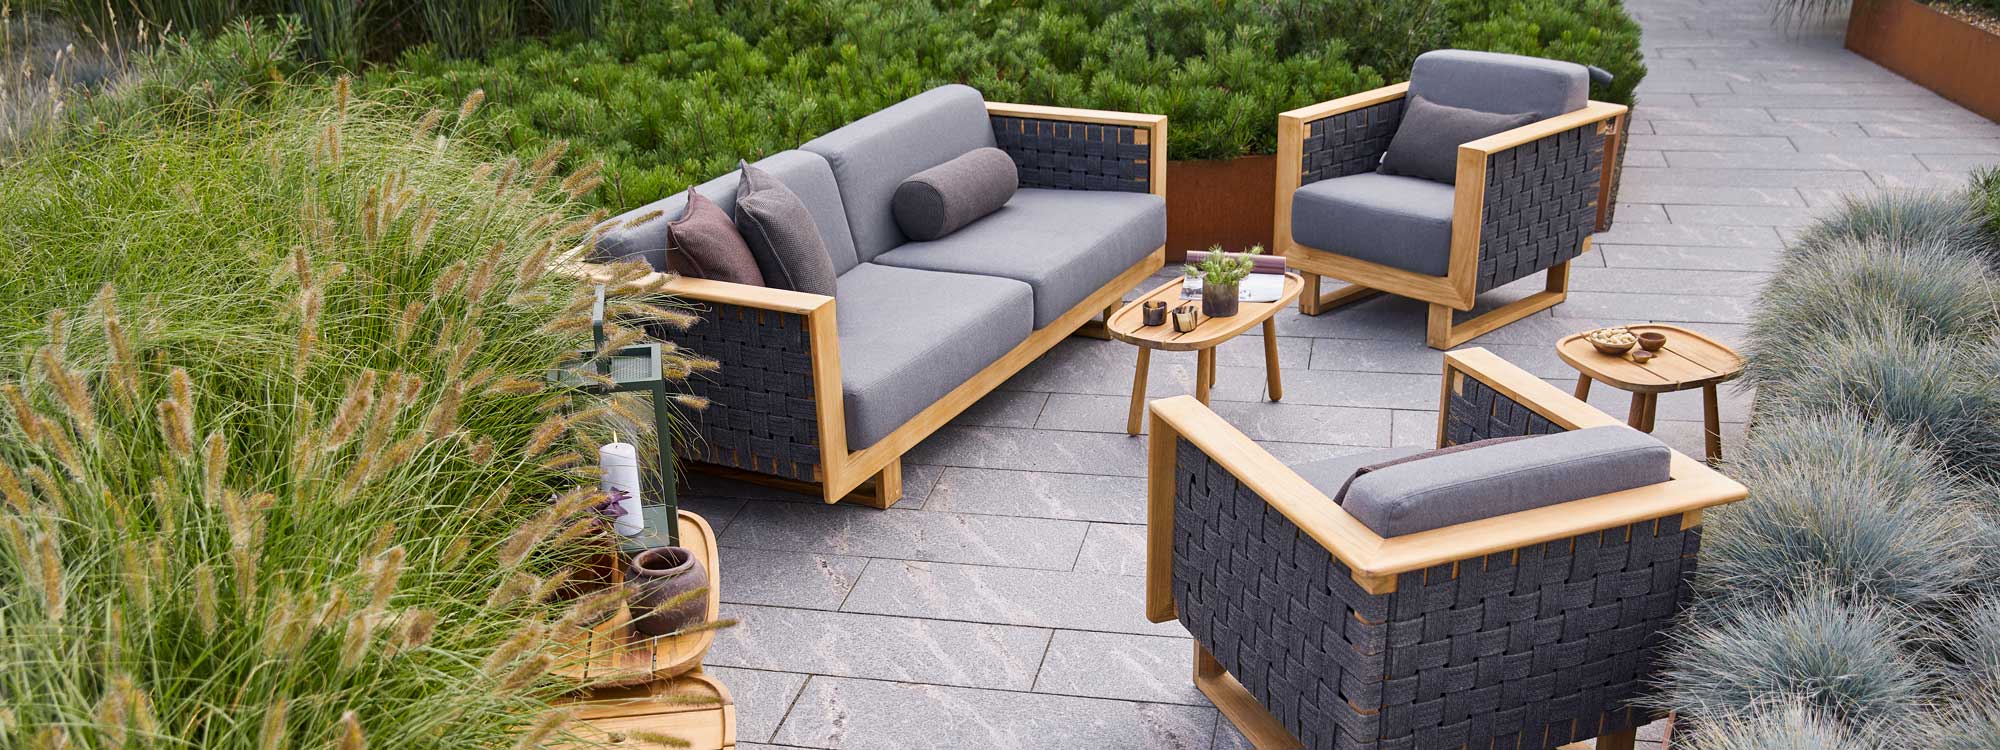 Image of Cane-line Angle outdoor lounge furniture with teak frames and grey AirTouch fabric cushions